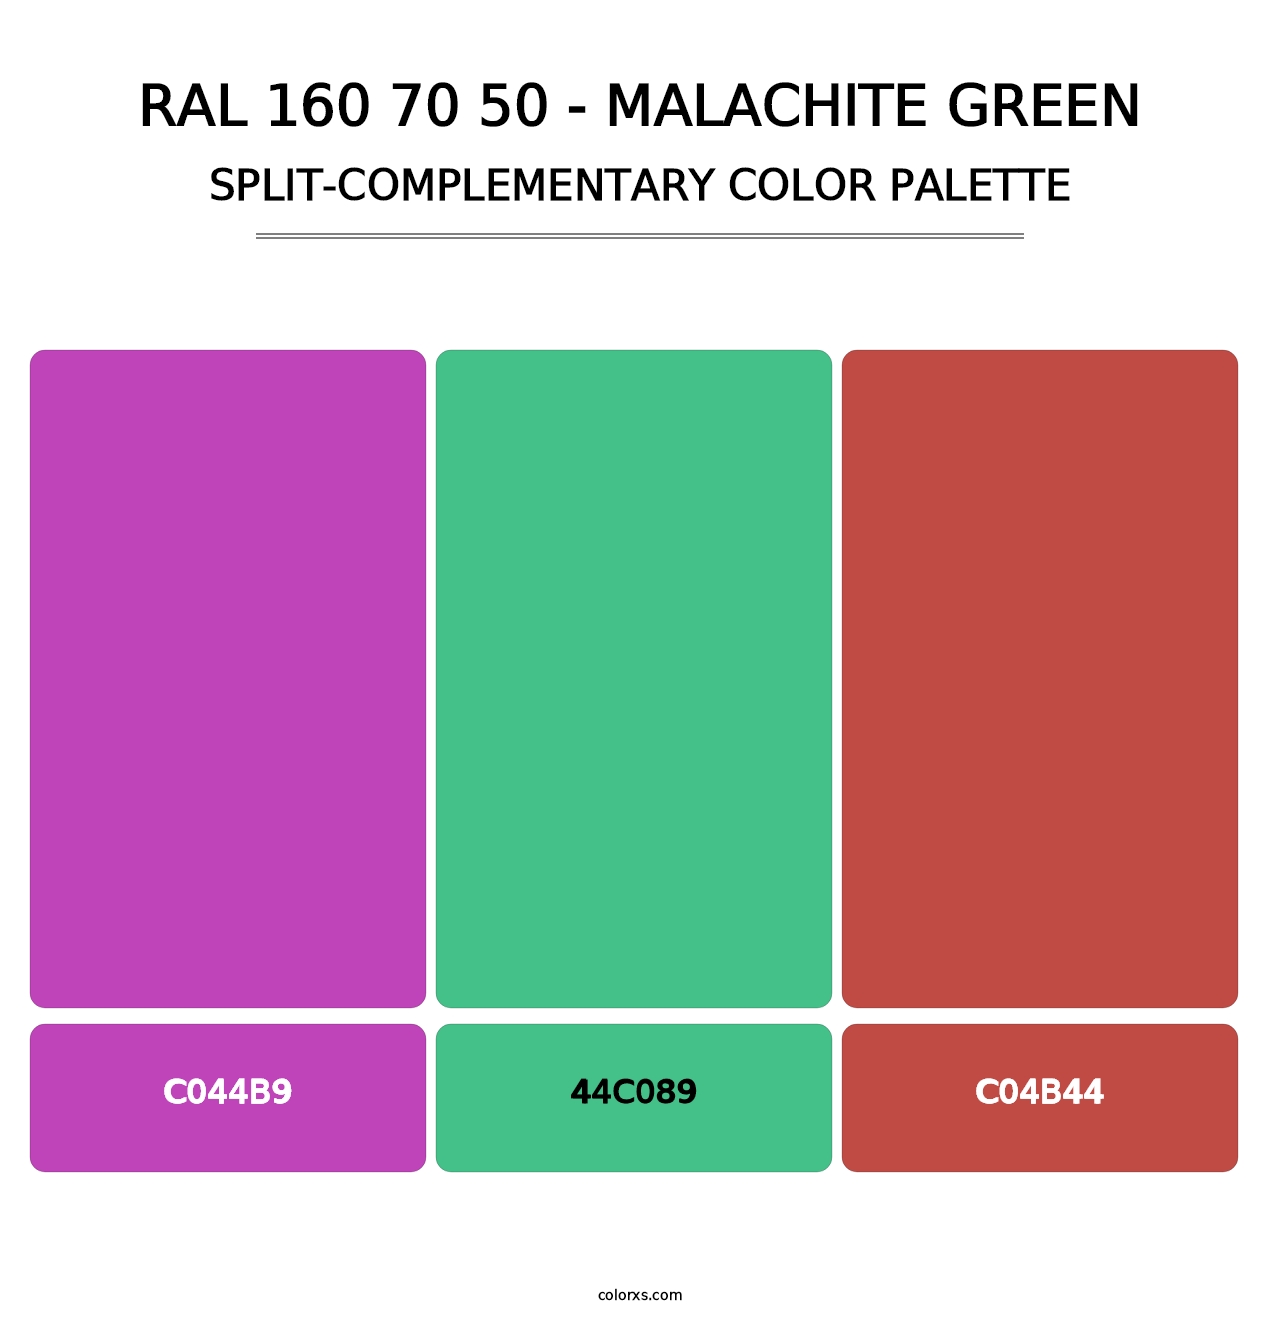 RAL 160 70 50 - Malachite Green - Split-Complementary Color Palette